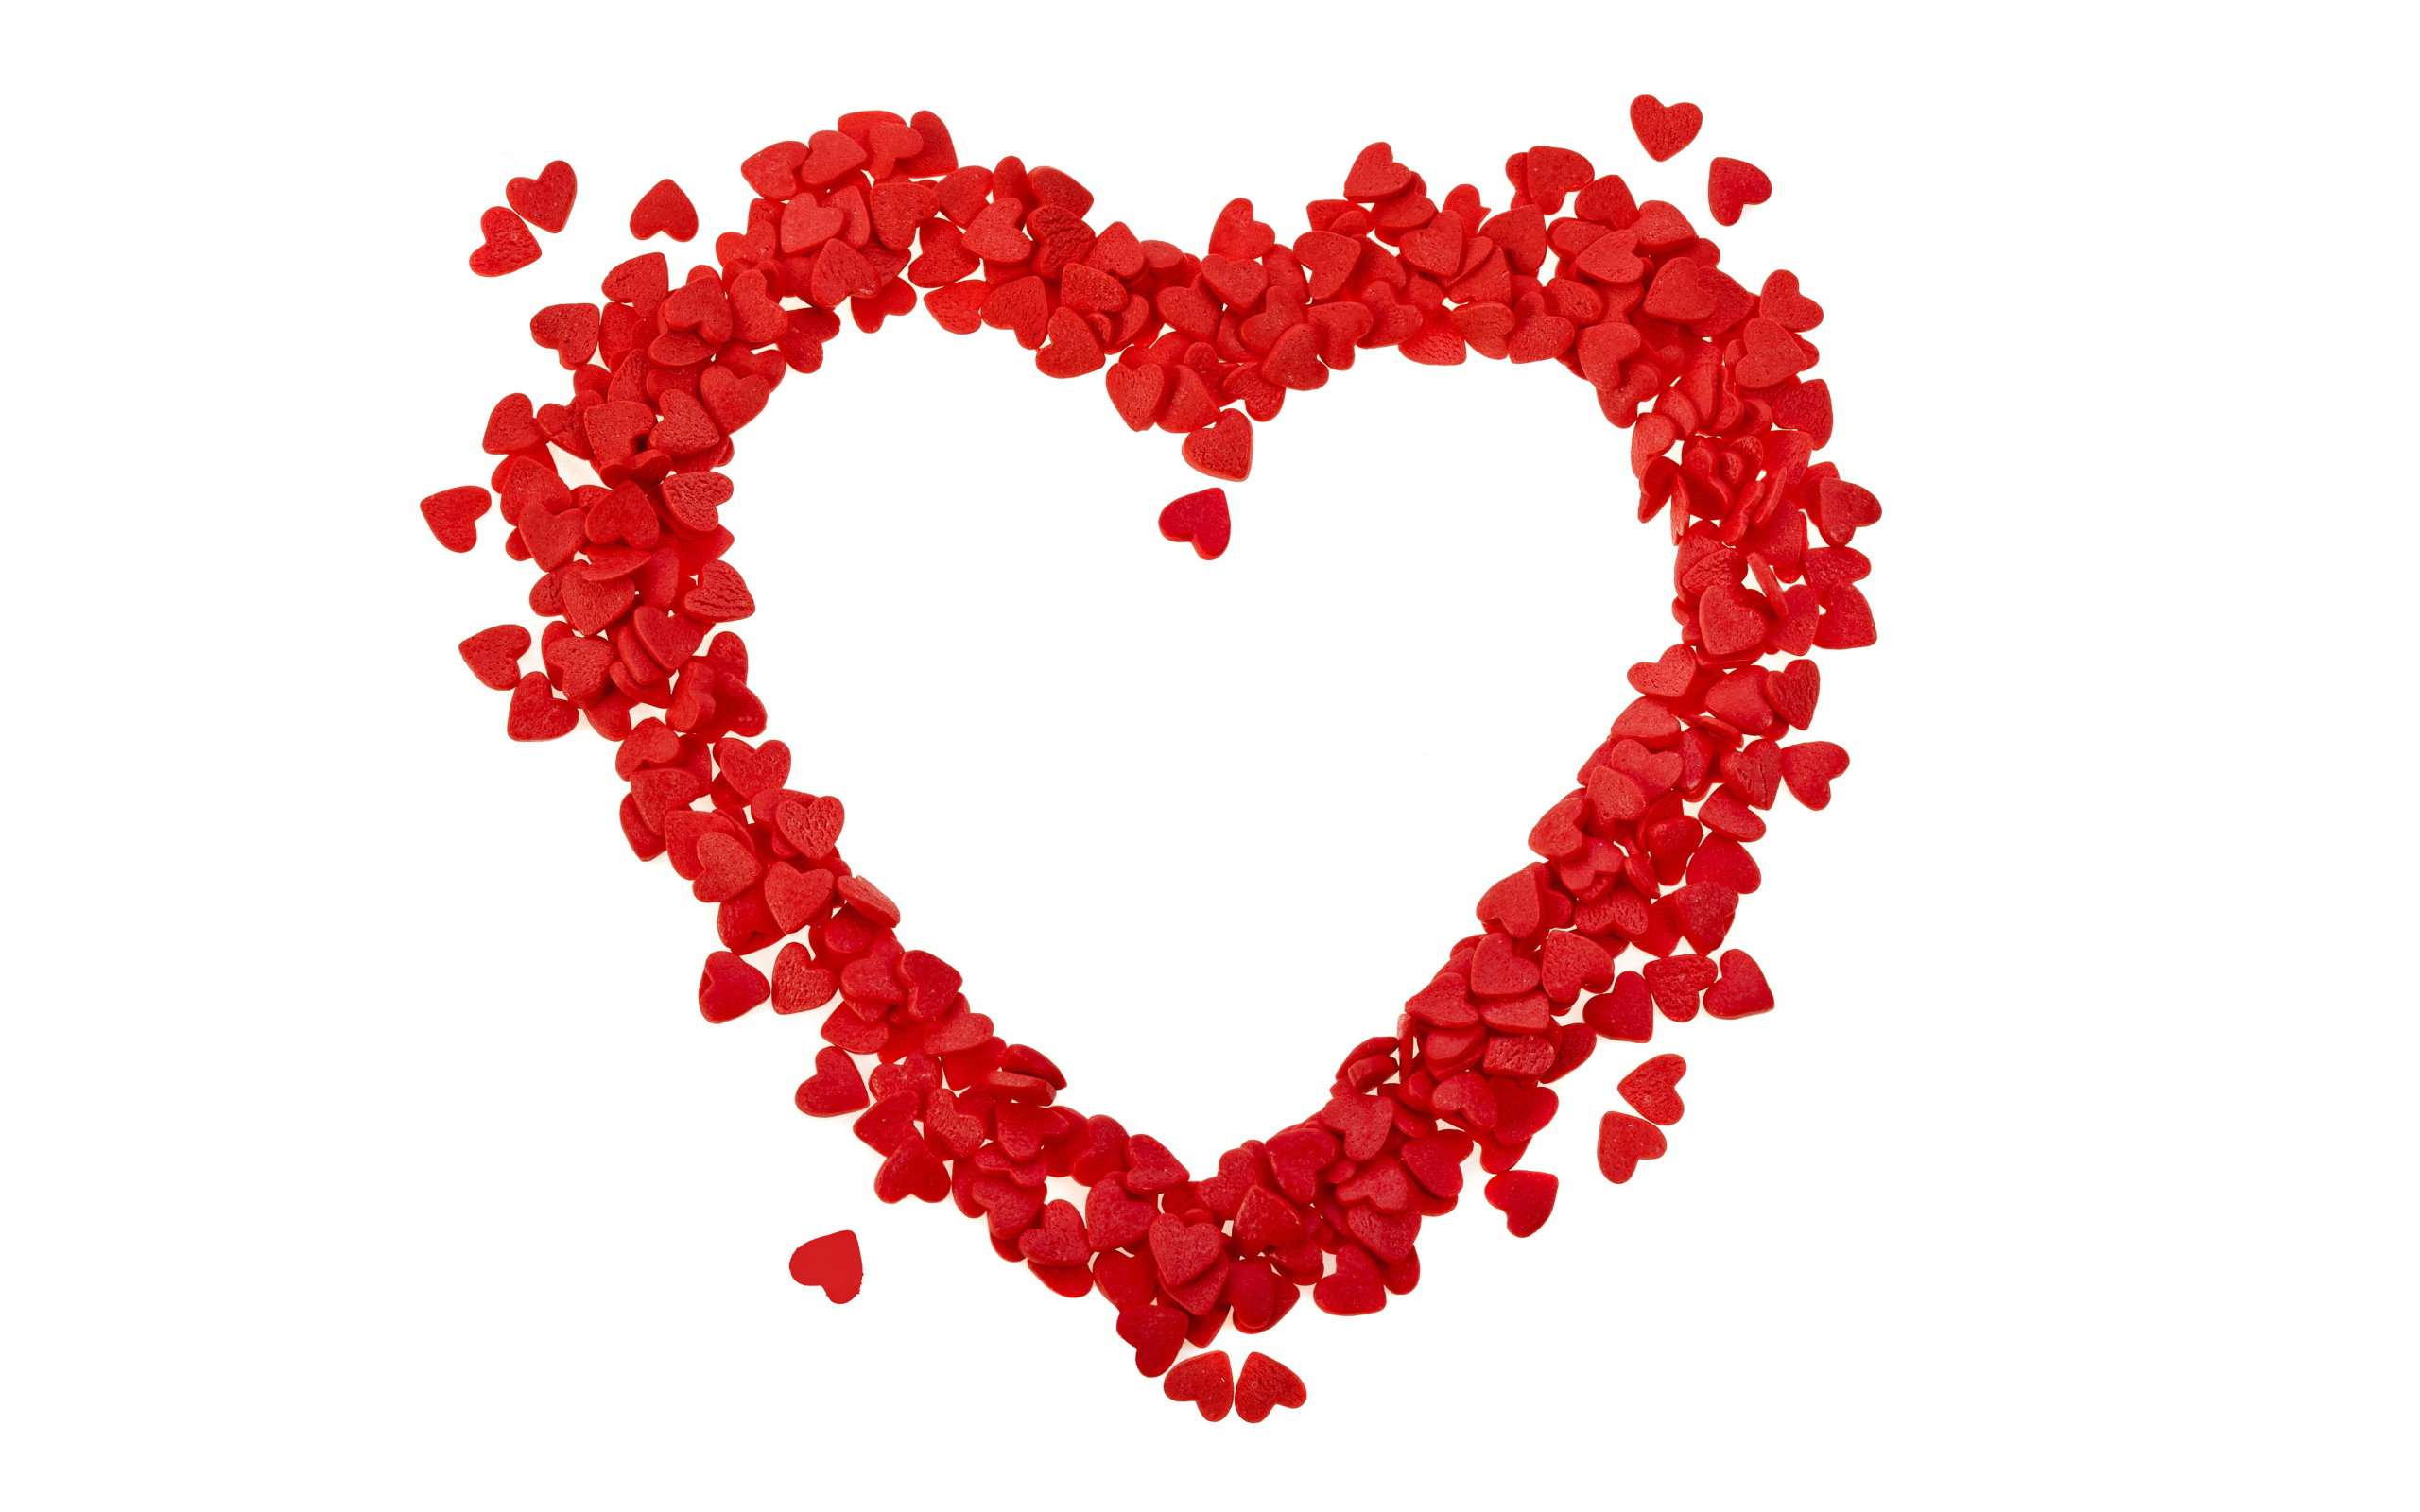 Heart of small red hearts on a white background.